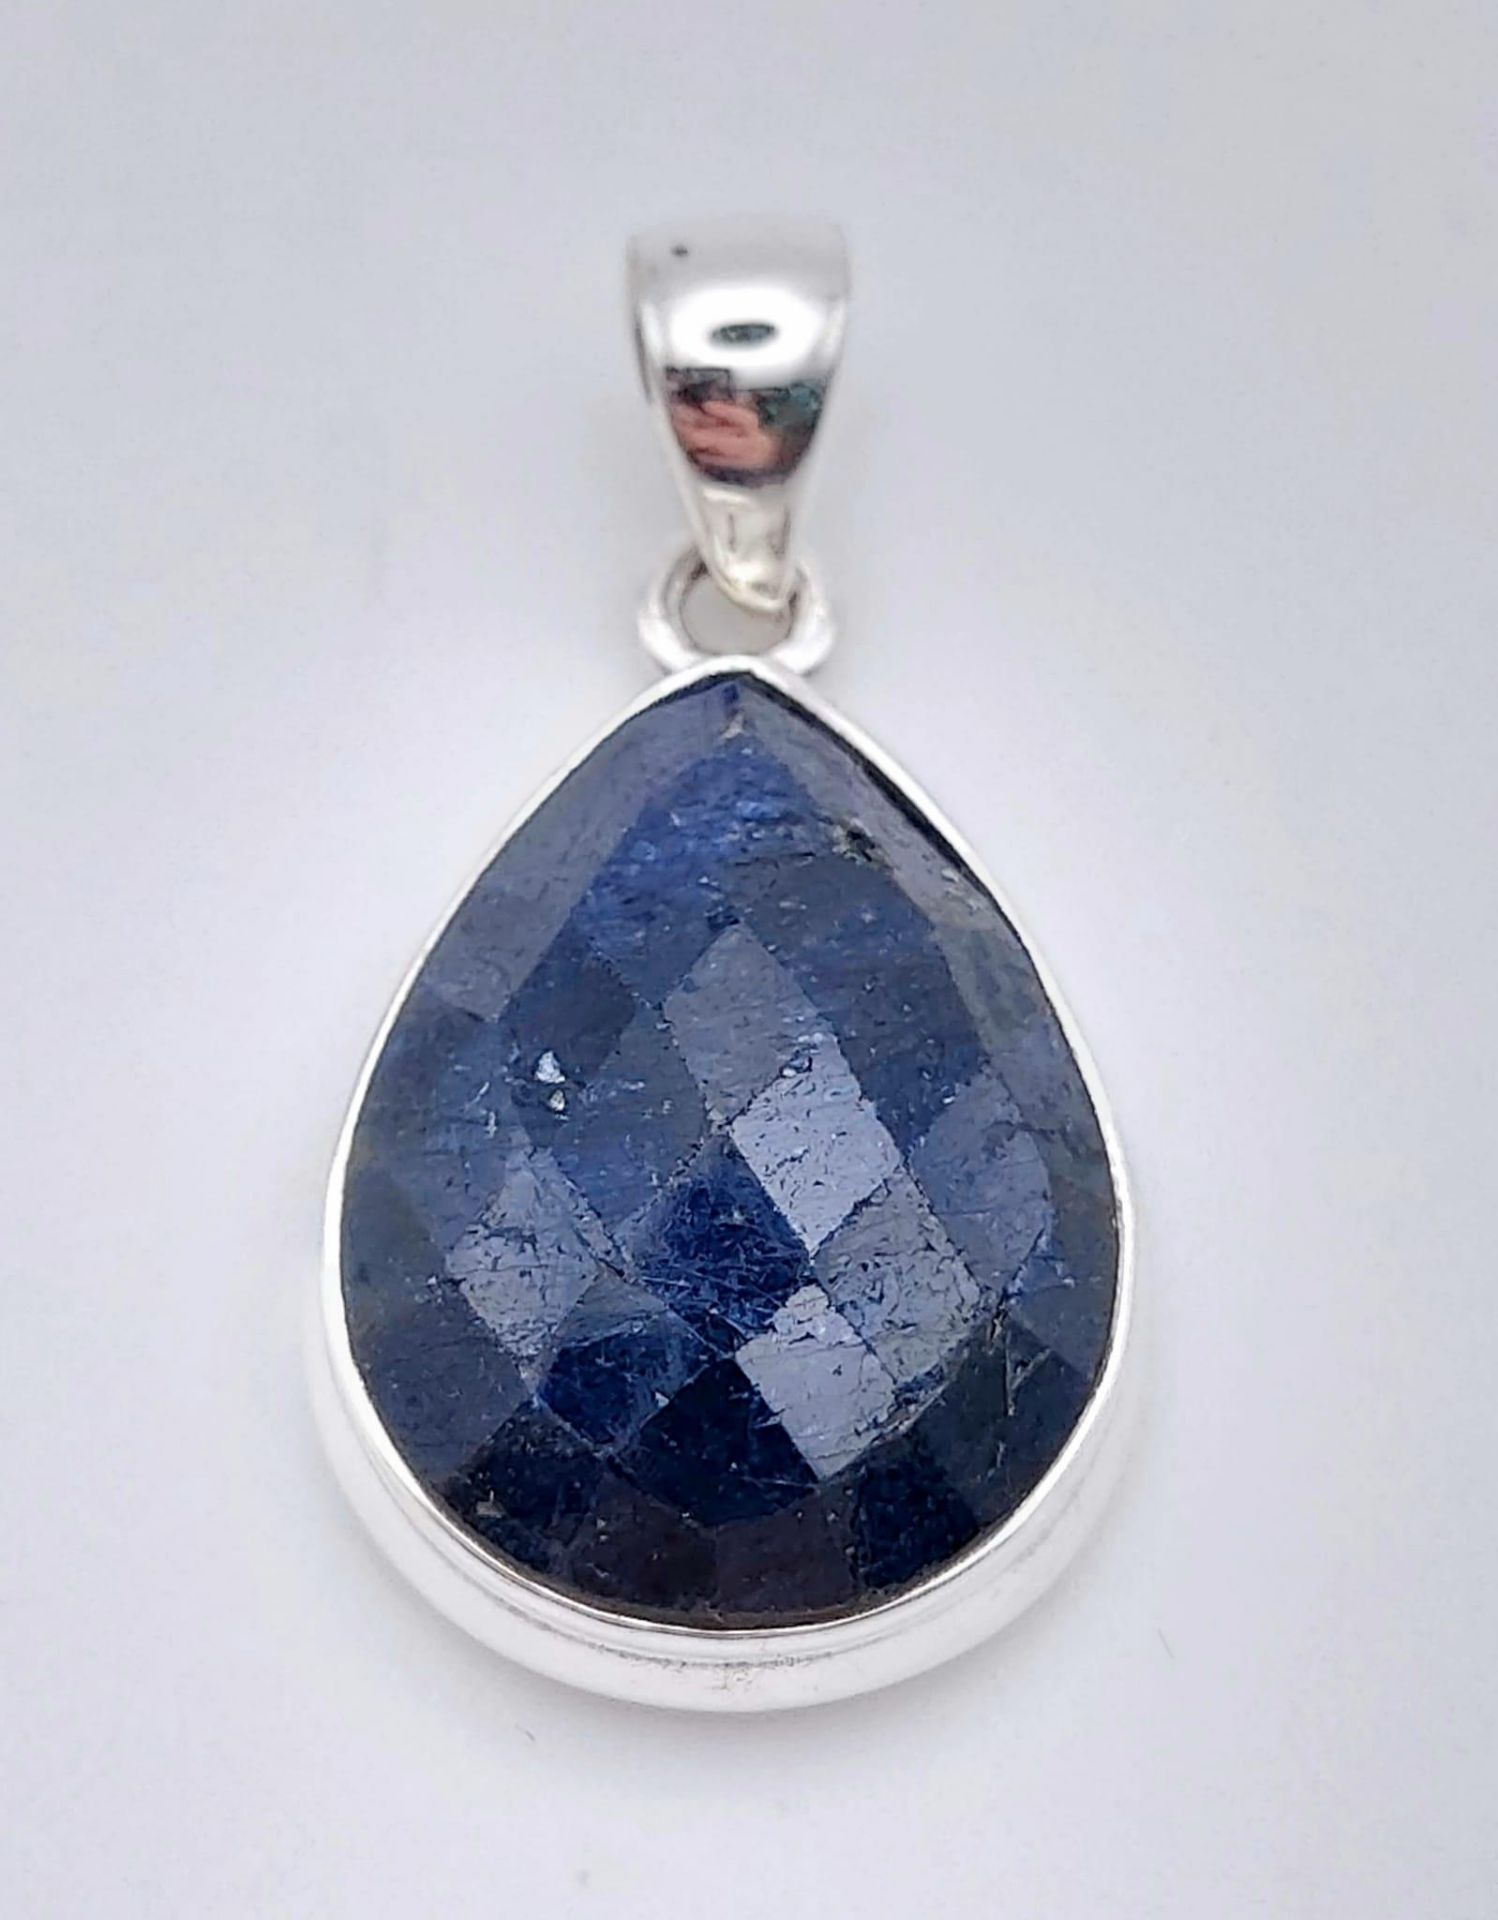 925 Silver Pendant with Matching Ring. Total Weight 14.18grams. Ring Size M. - Image 4 of 7